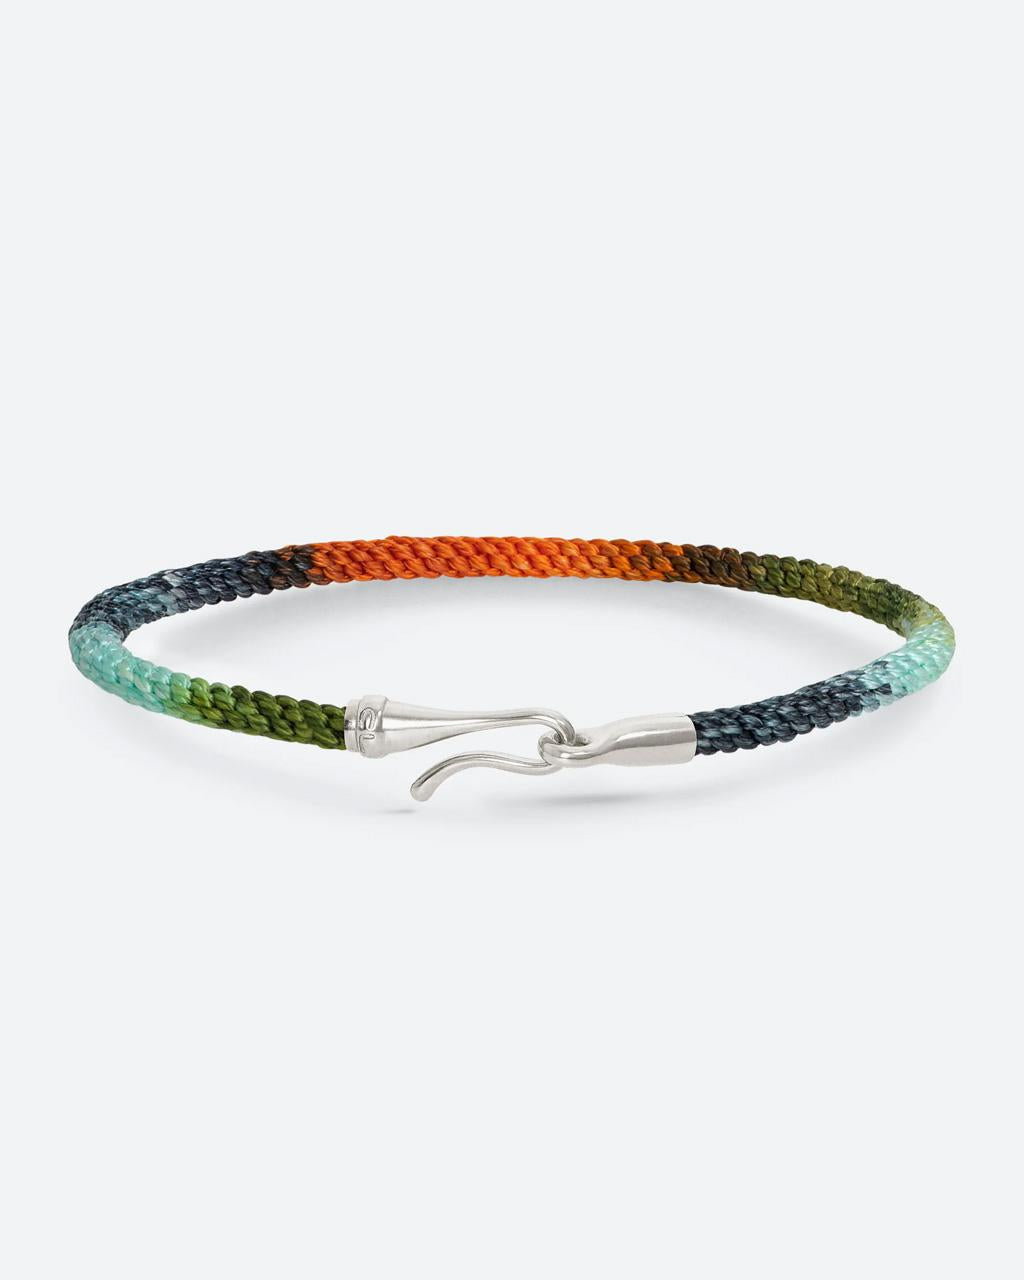 OLE LYNGGAARD SILVER WITH MULTICOLORED FABRIC BRACELET LIFE